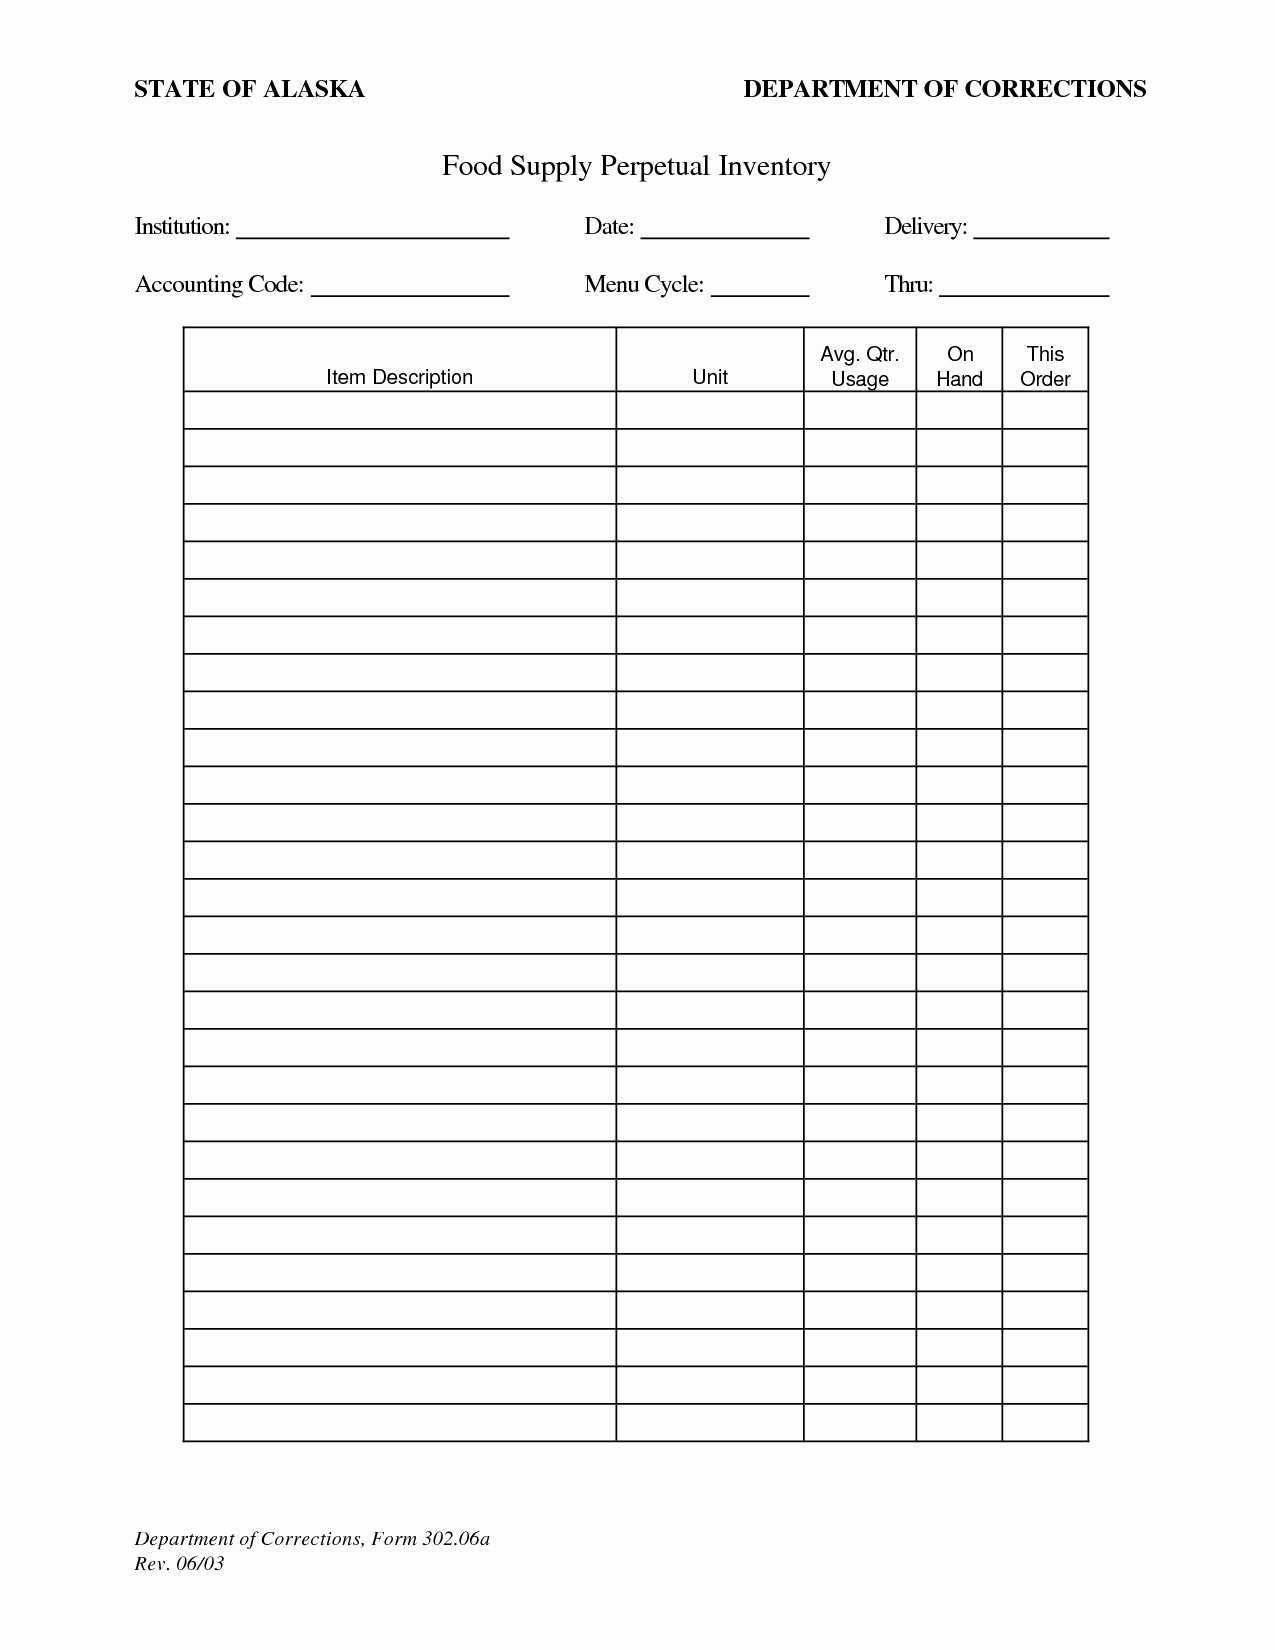 monthly household expense report template